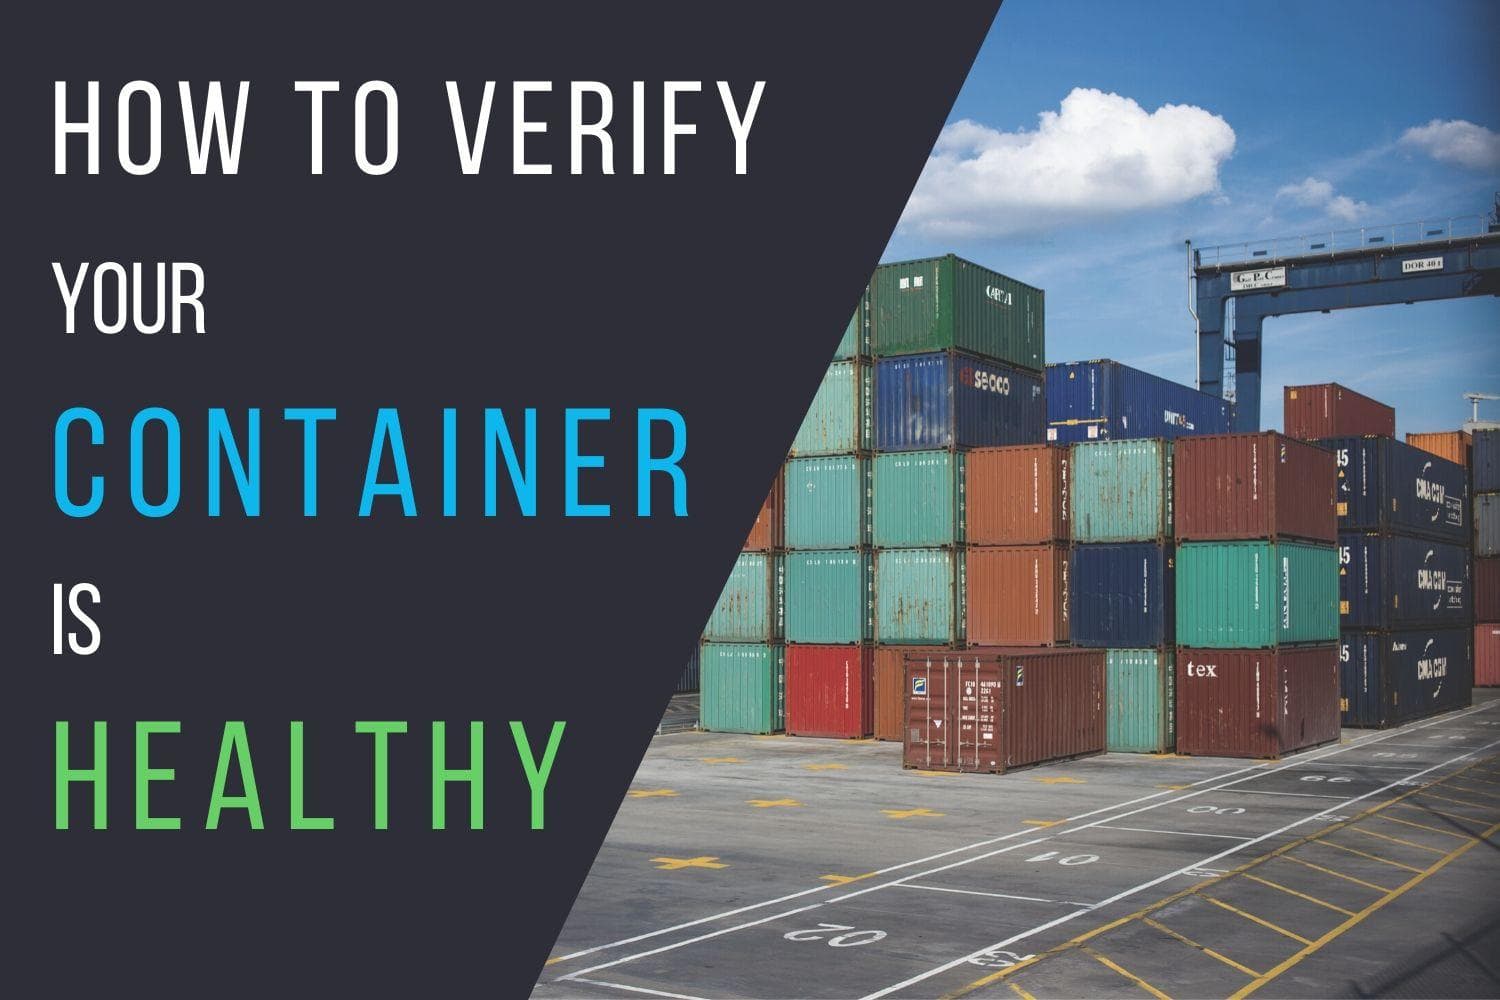 How to verify your container is healthy